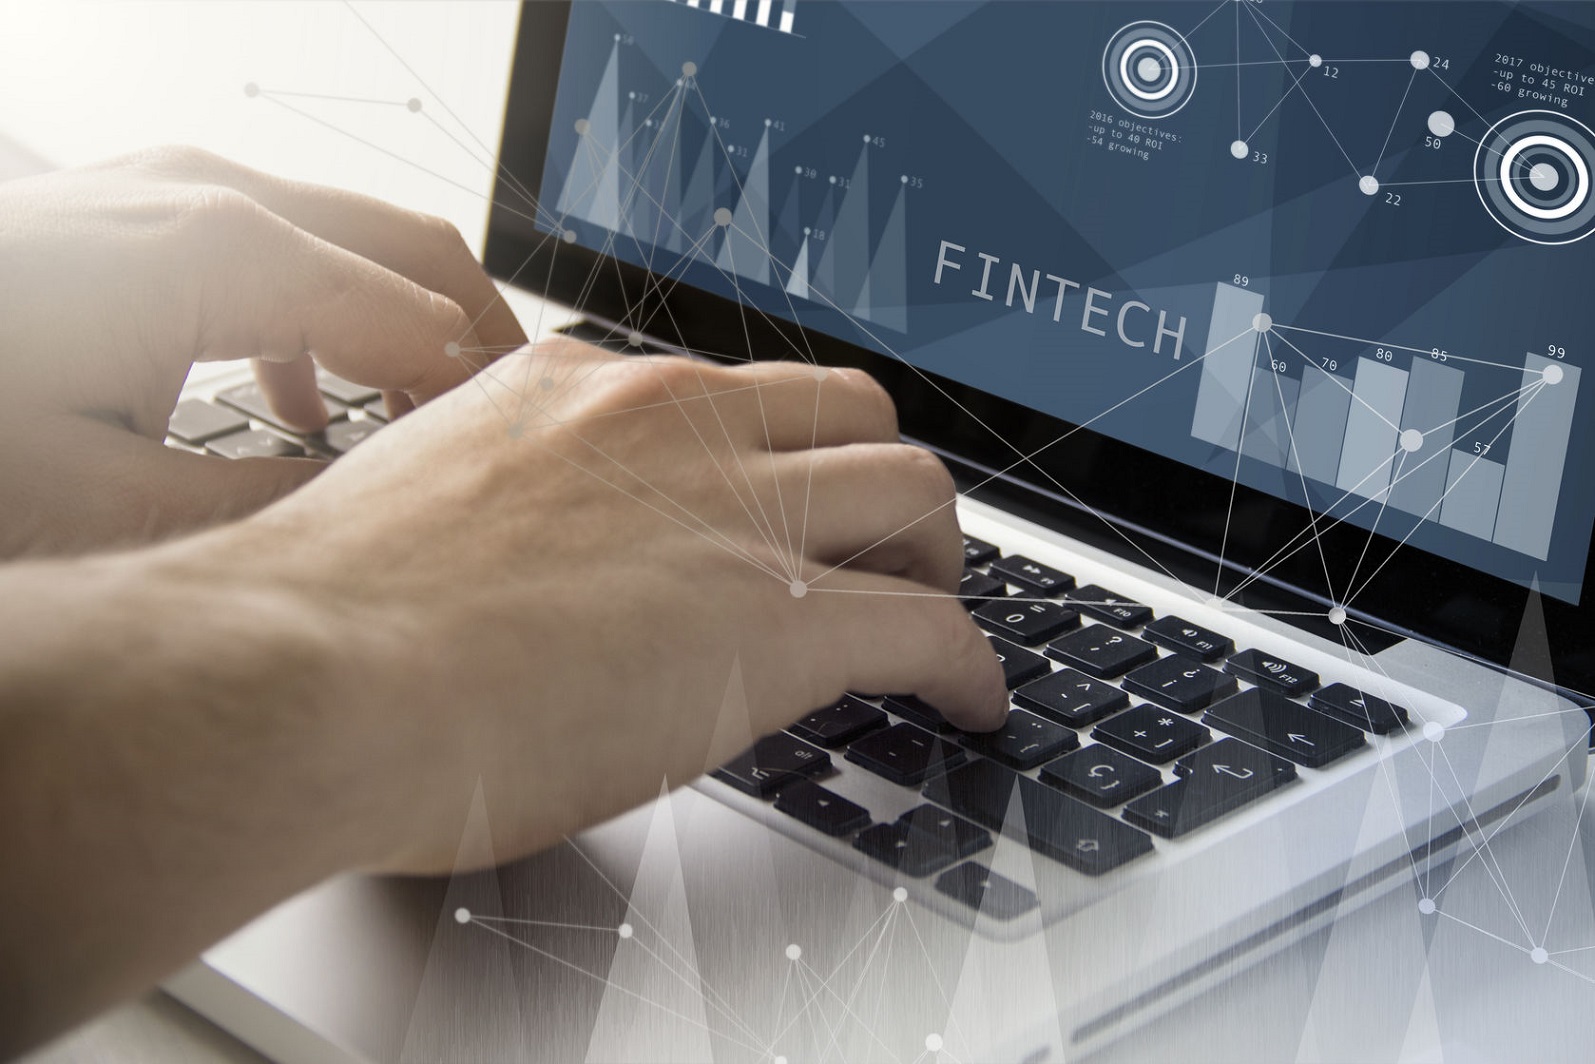 SEA fintech firms show strong growth aspirations amid funding challenges